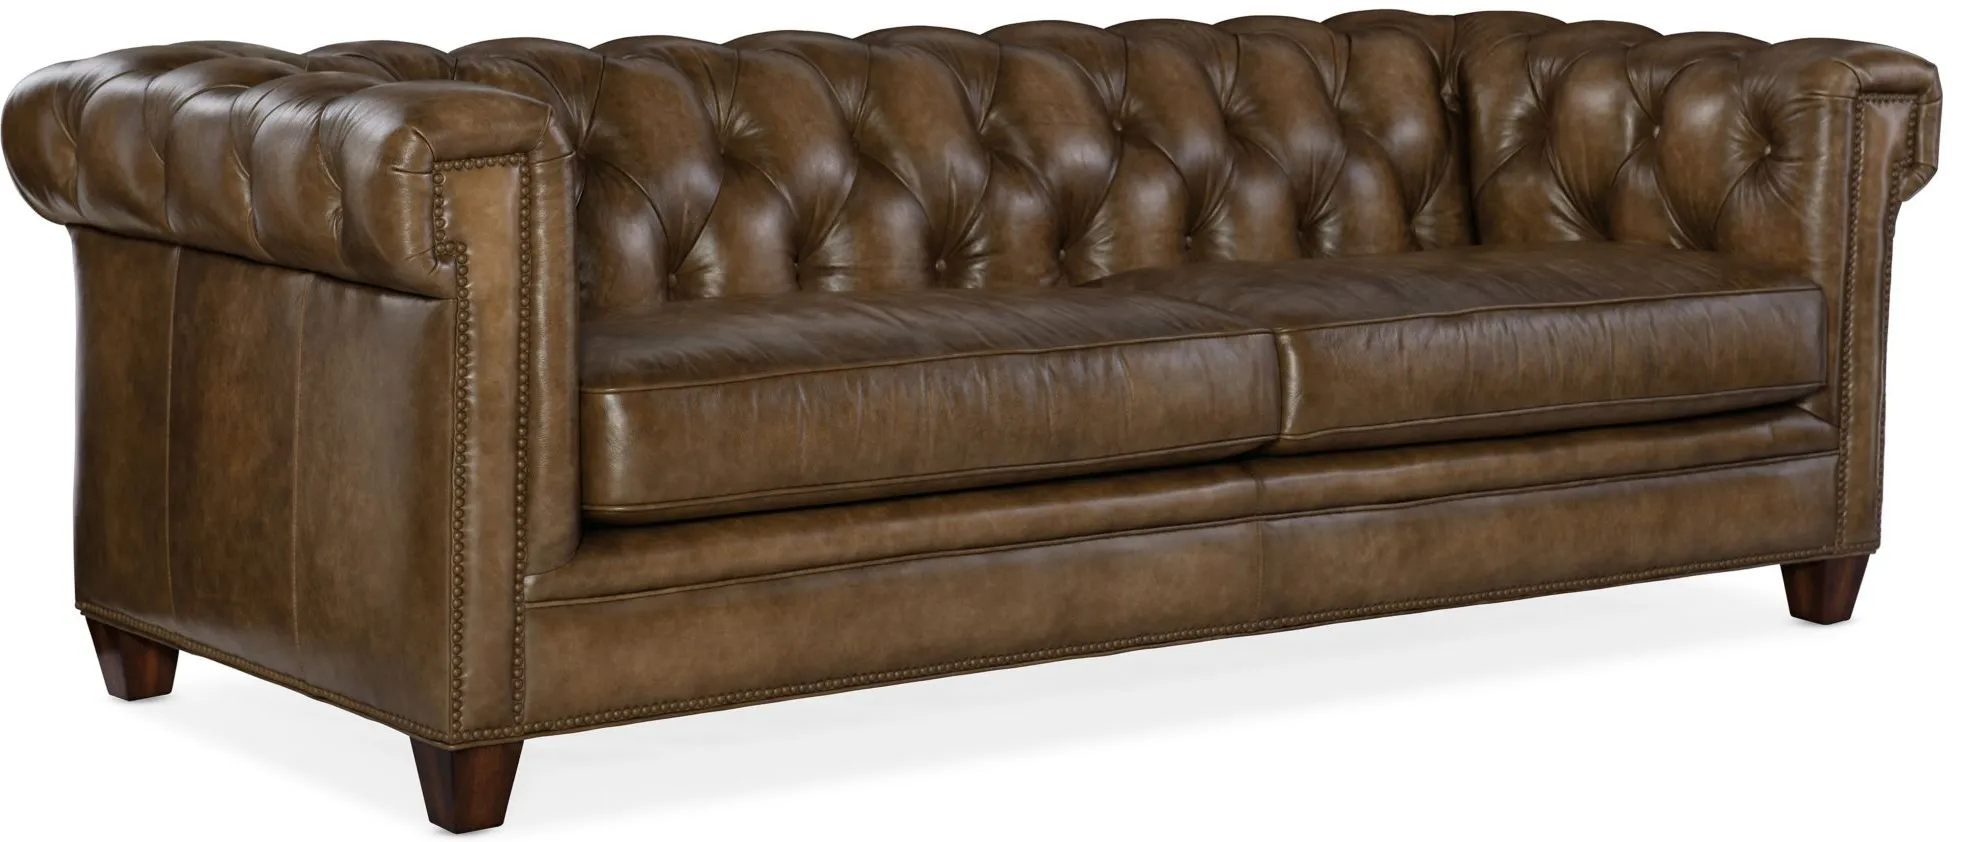 Chester Tufted Stationary Sofa in Brown by Hooker Furniture